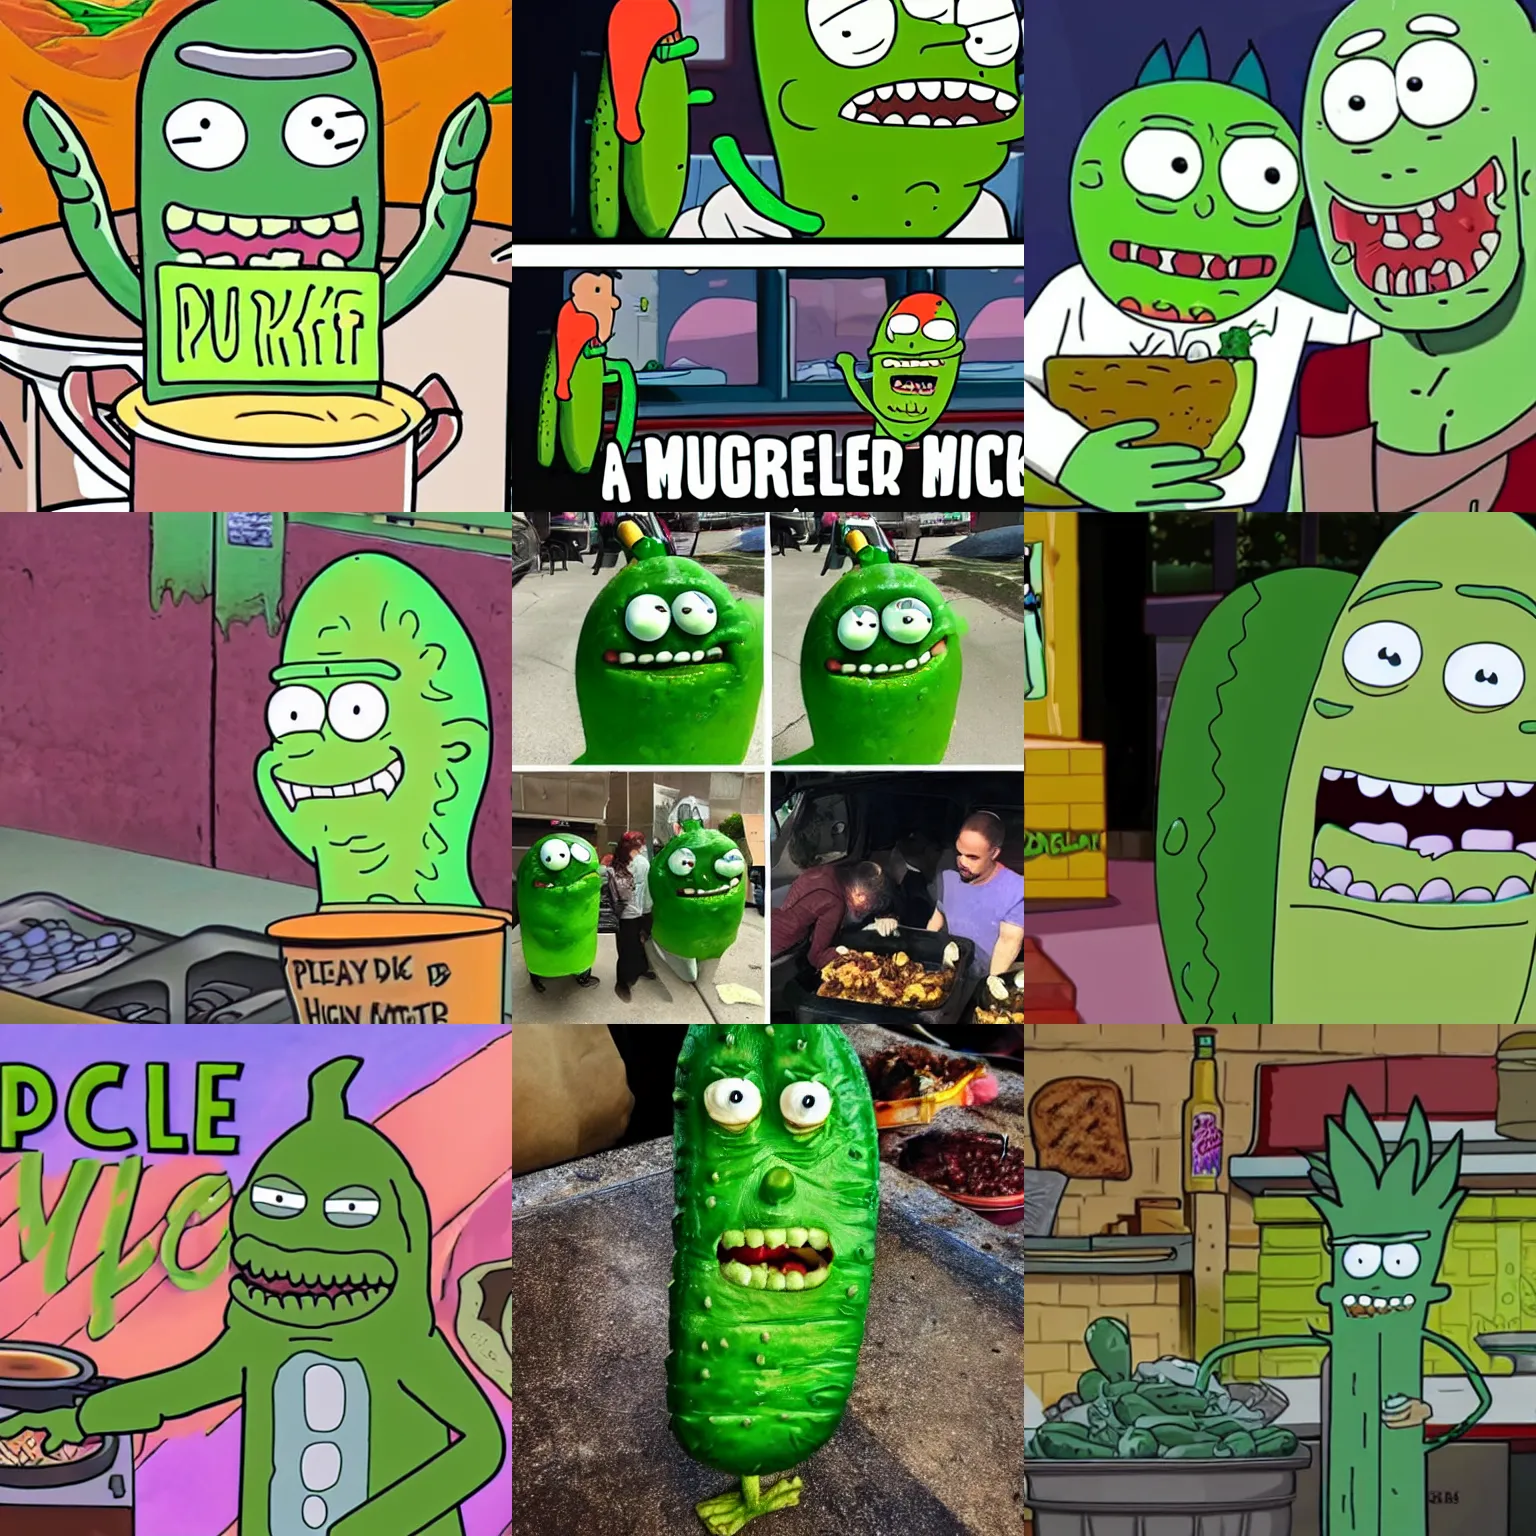 Prompt: pickle rick feeds the homeless, cartoon pickle, soup kitchen